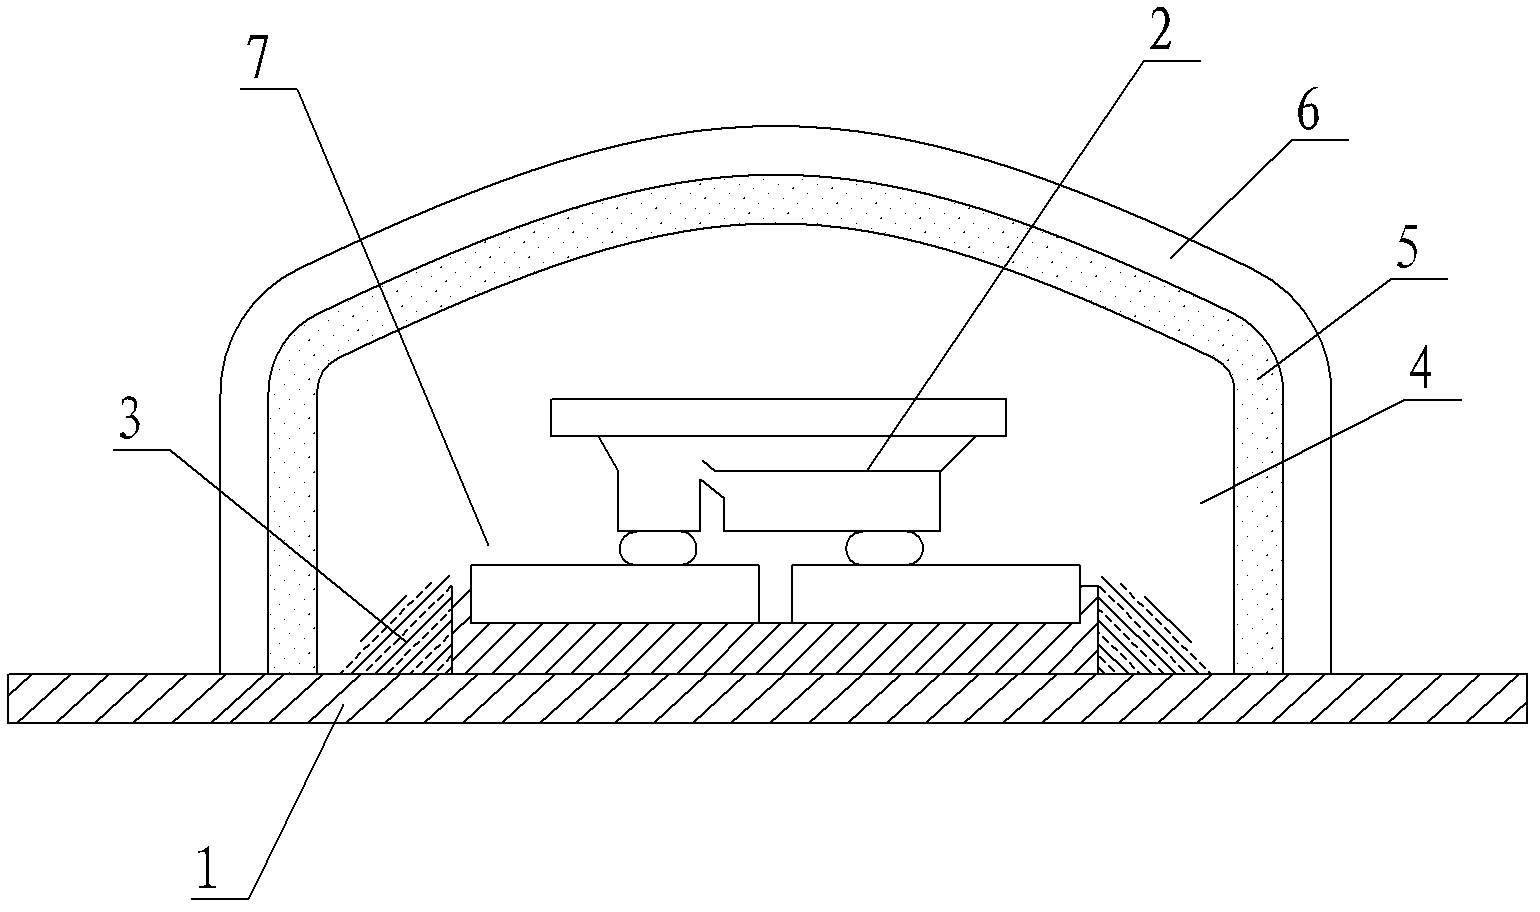 Packaging process for light-emitting diode (LED) with fluorescent glue film and LED packaging